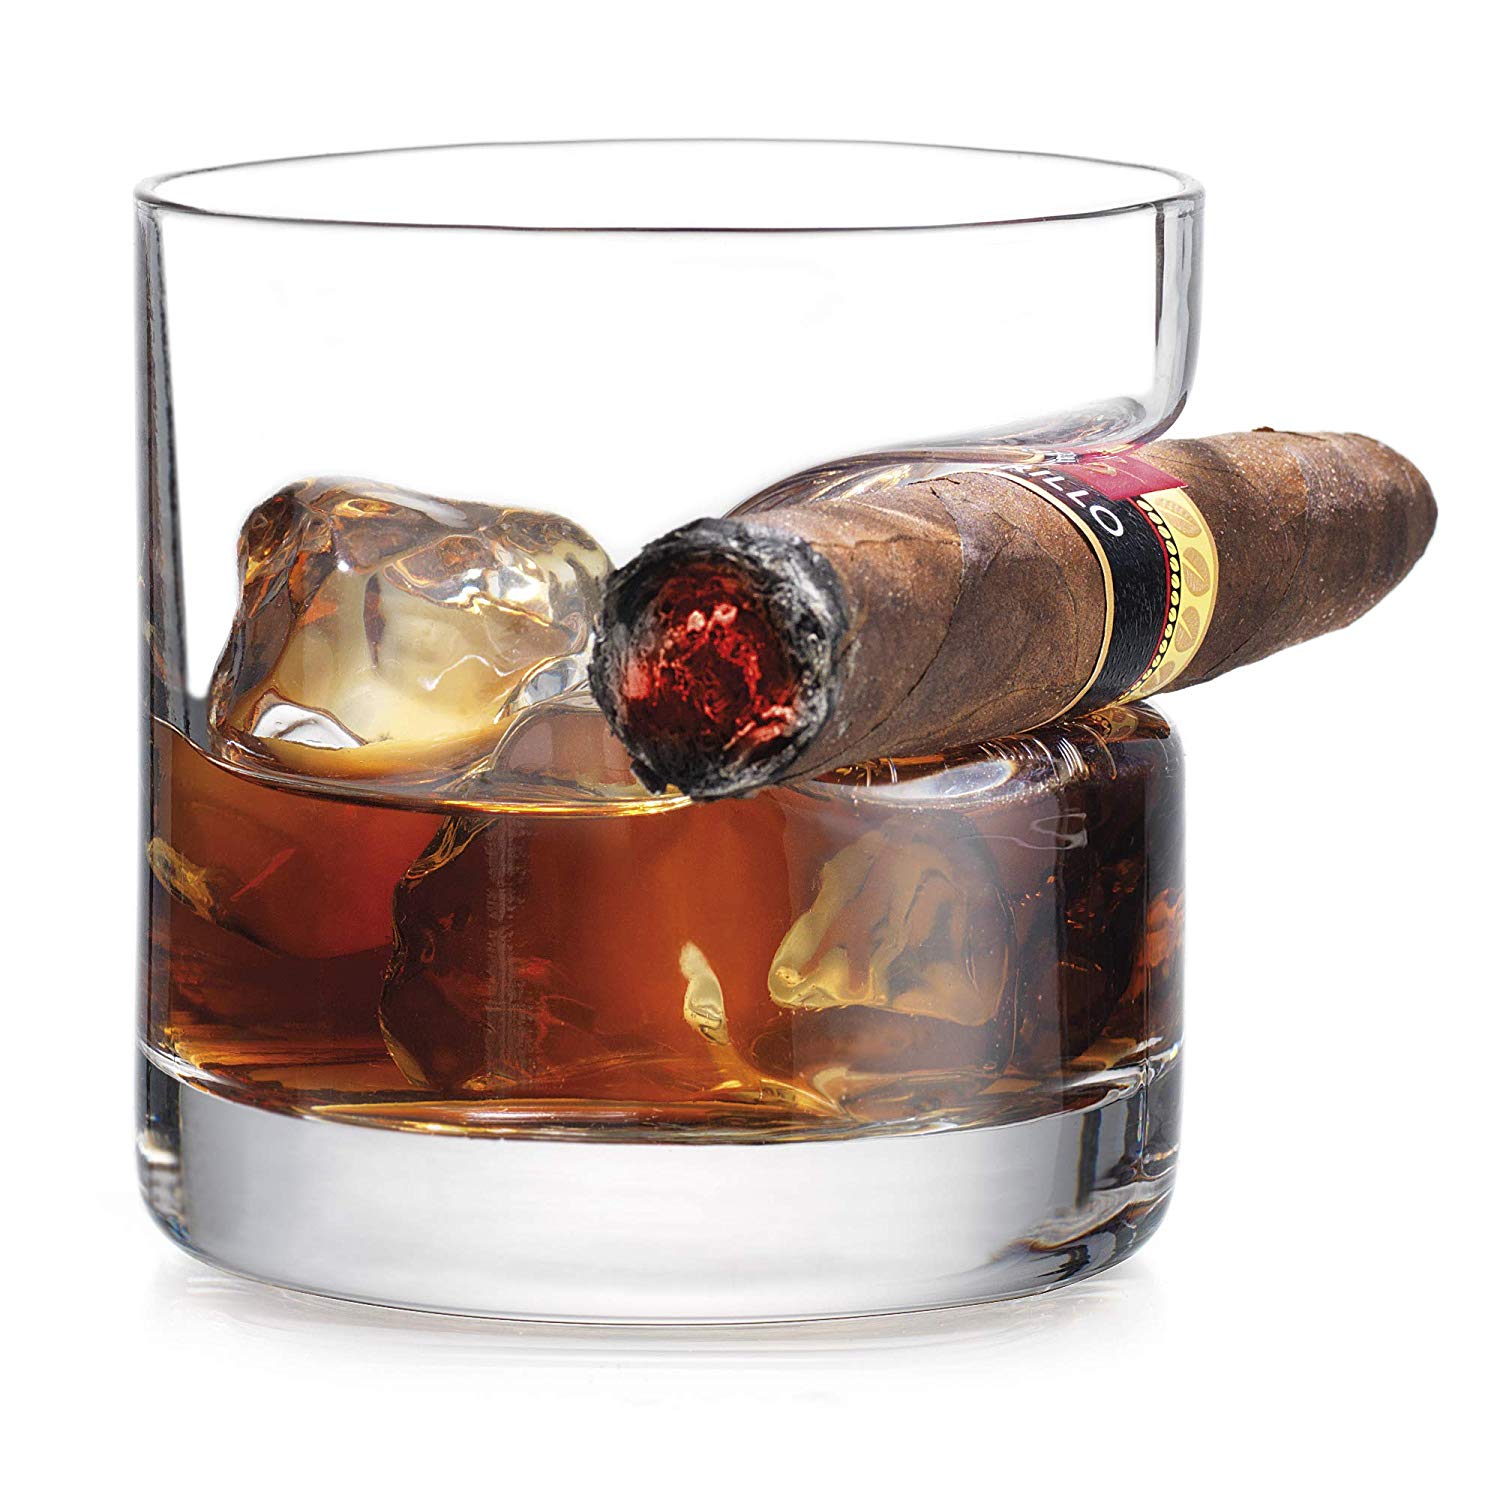 Cigar Rest Whiskey Glass, The Old-fashioned Bar Accessory